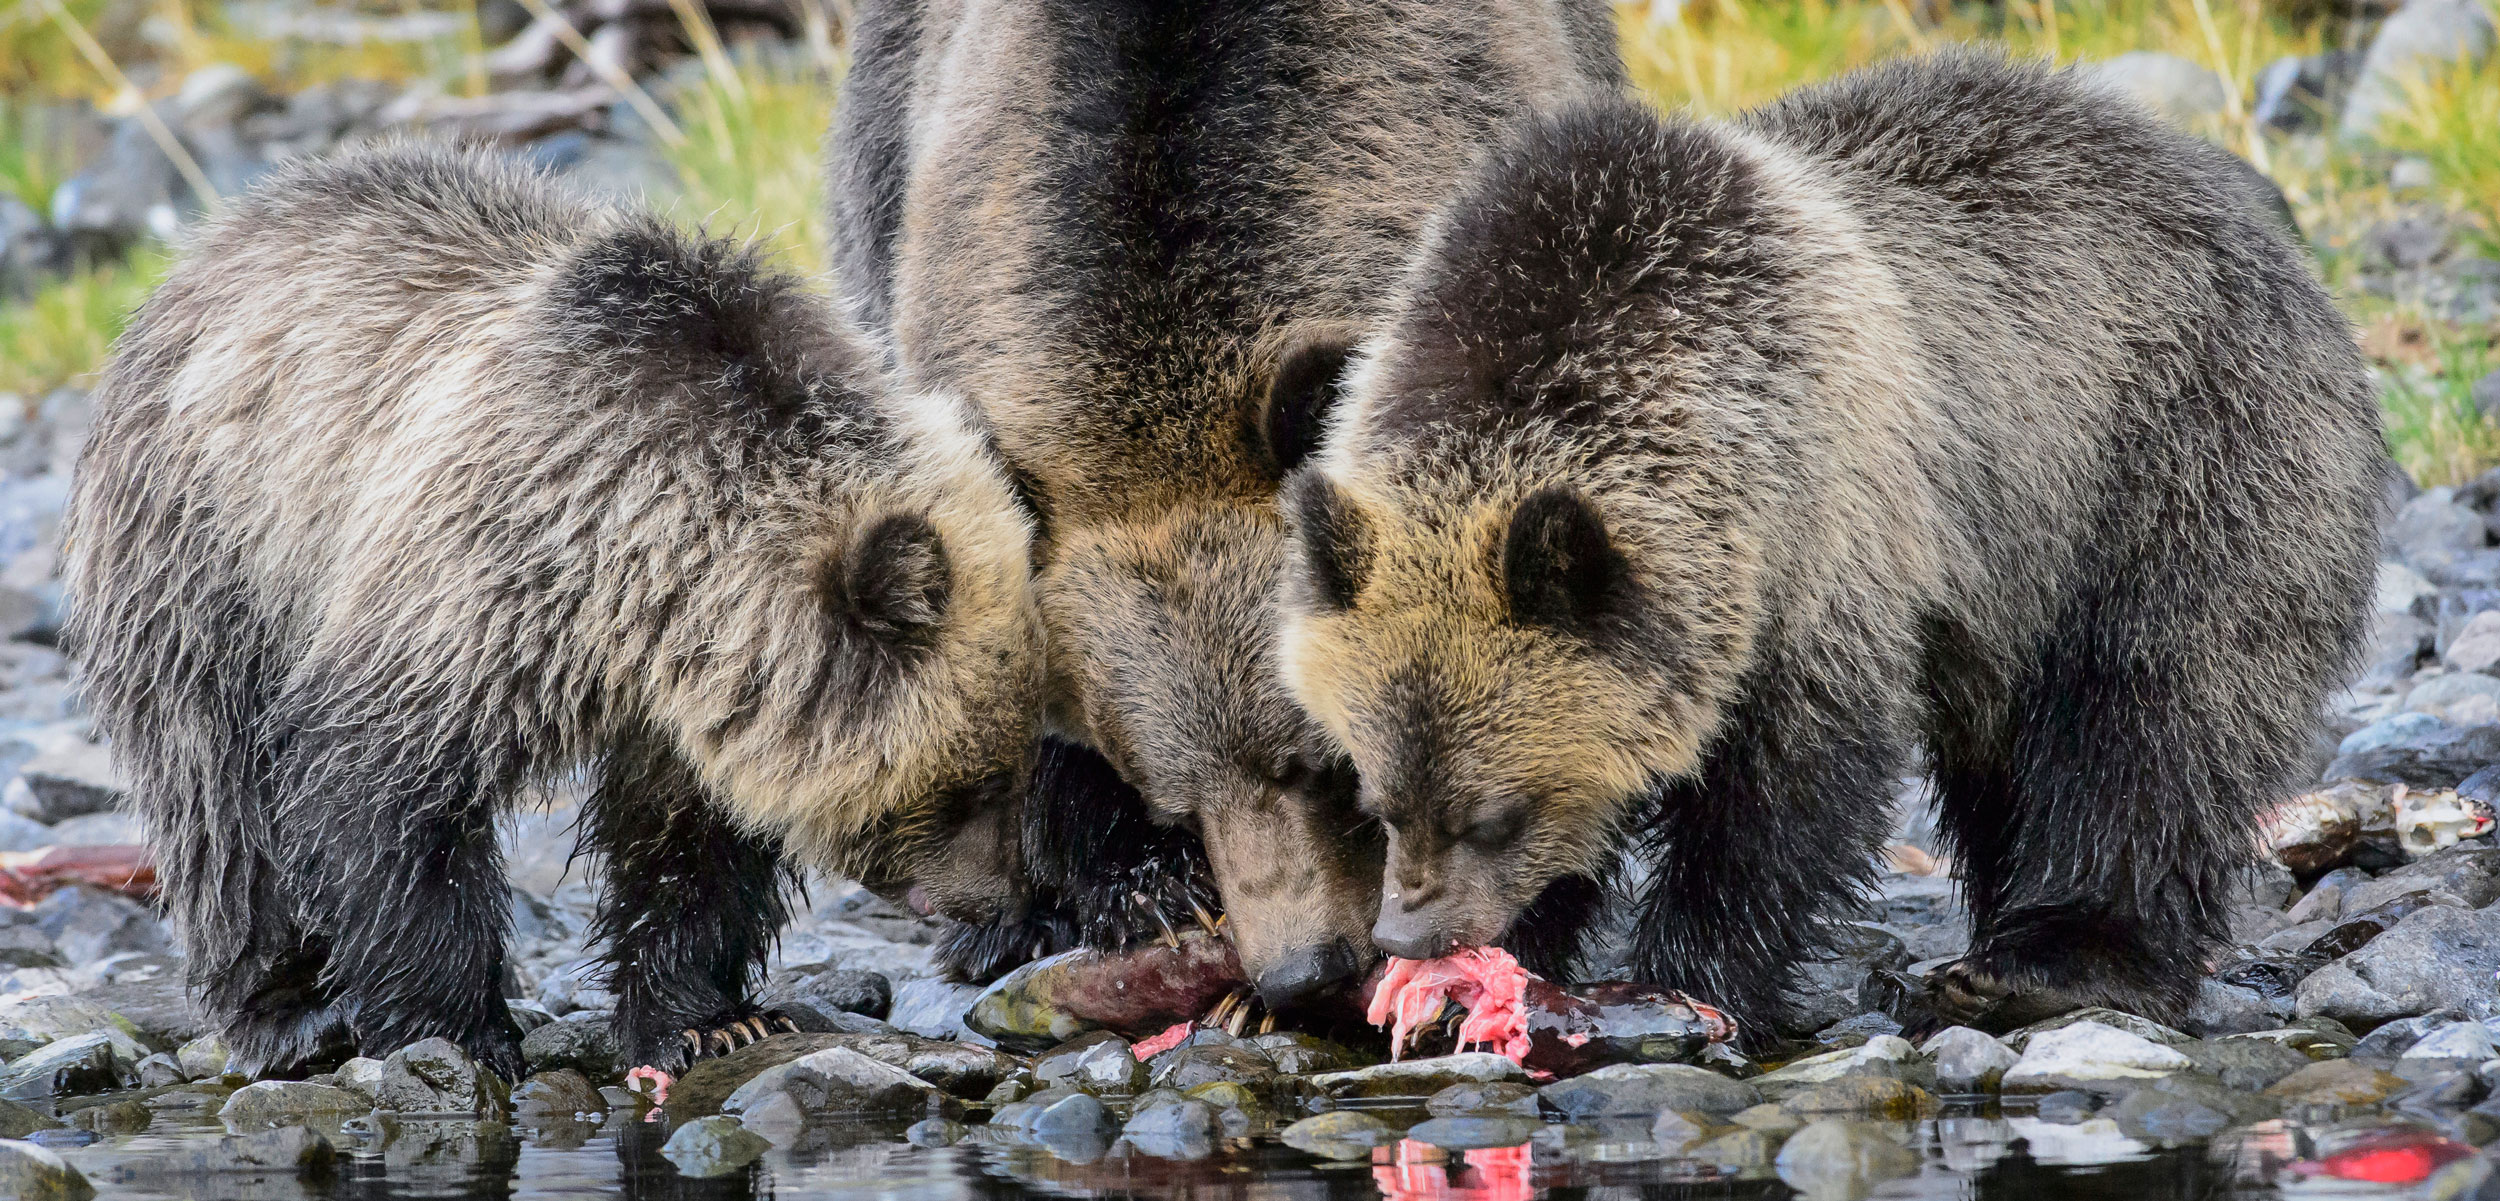 grizzly bears eating salmon